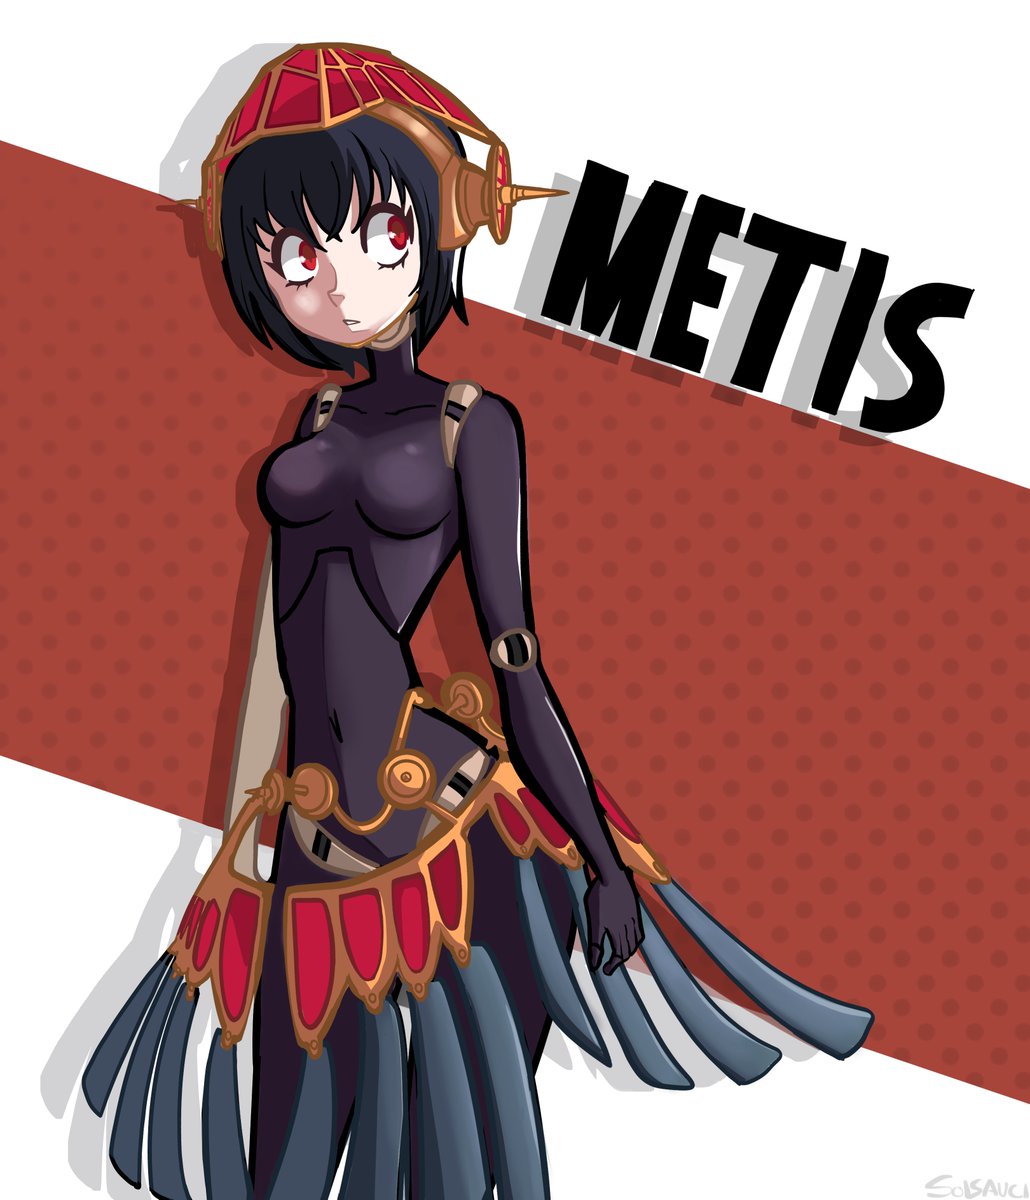 METIS #atlusfaithful #metis #Persona3Reload #Persona3 #Persona3theanswer